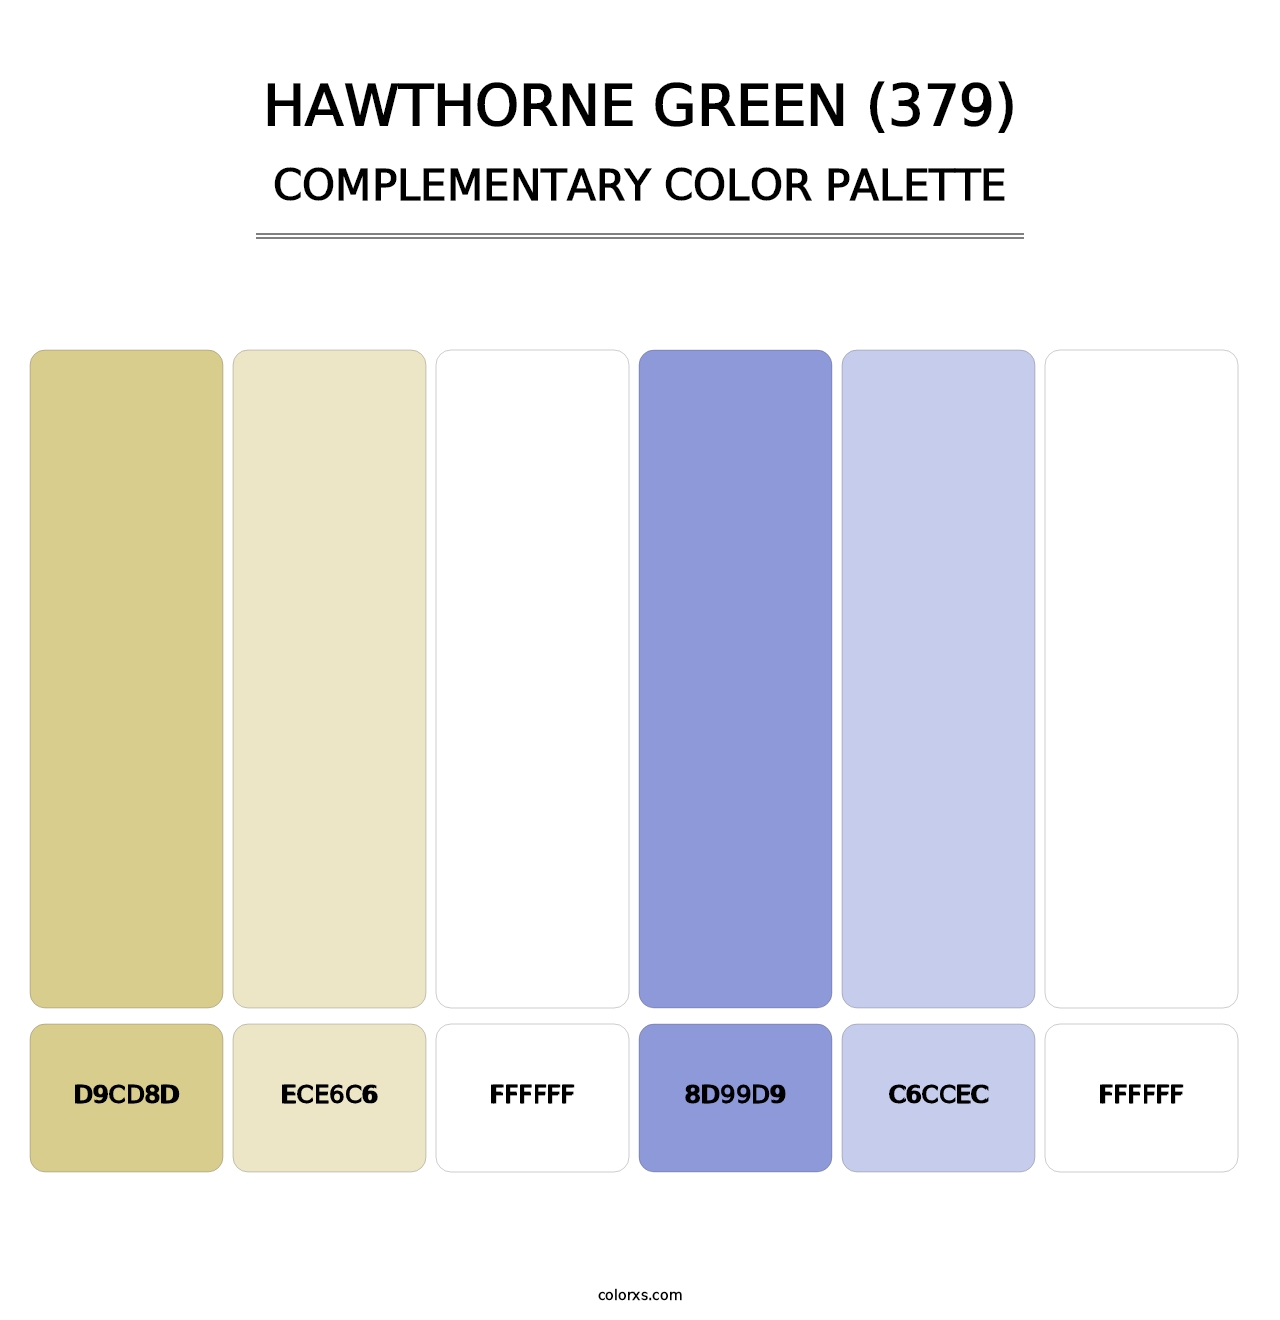 Hawthorne Green (379) - Complementary Color Palette